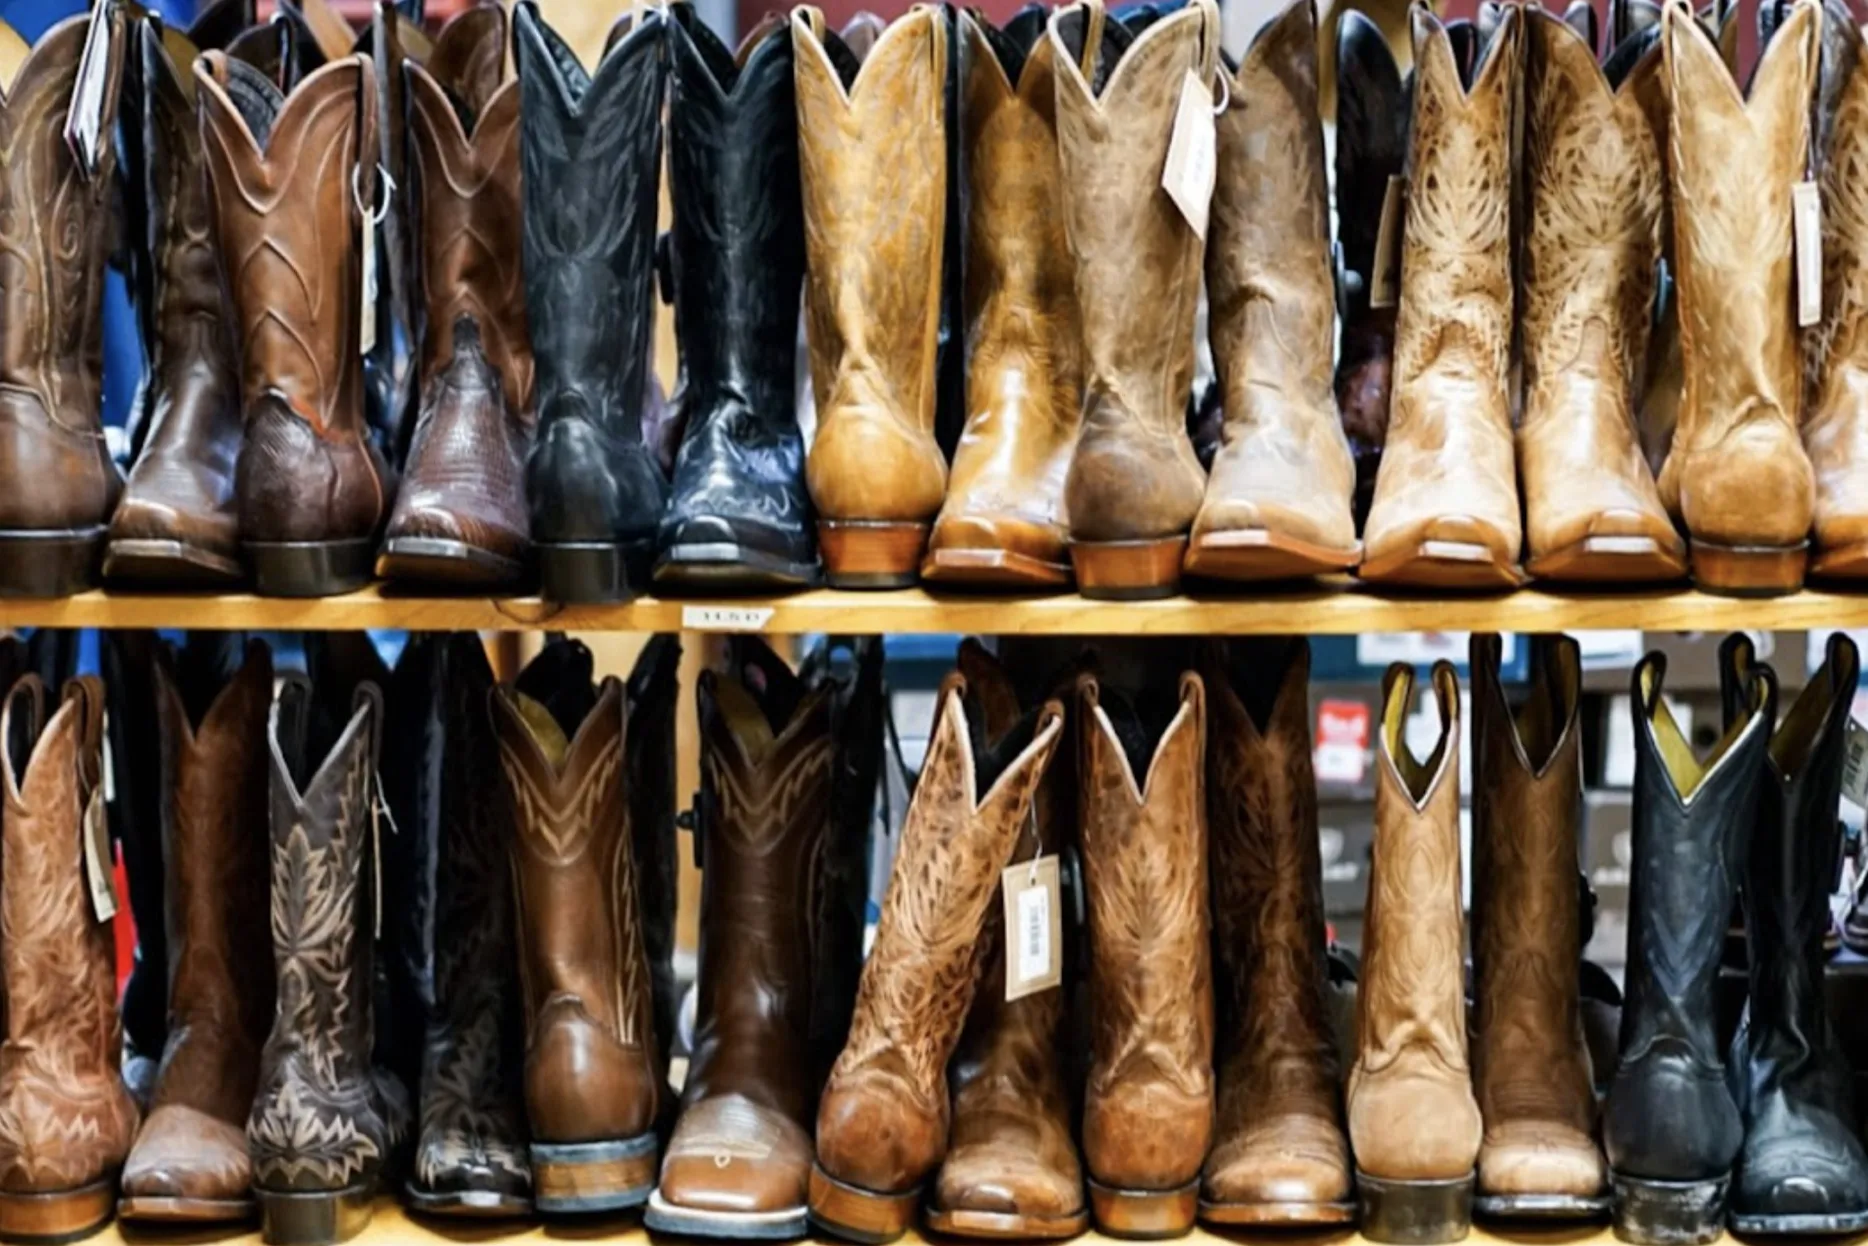 A wooden rack full of traditional cowboy boots